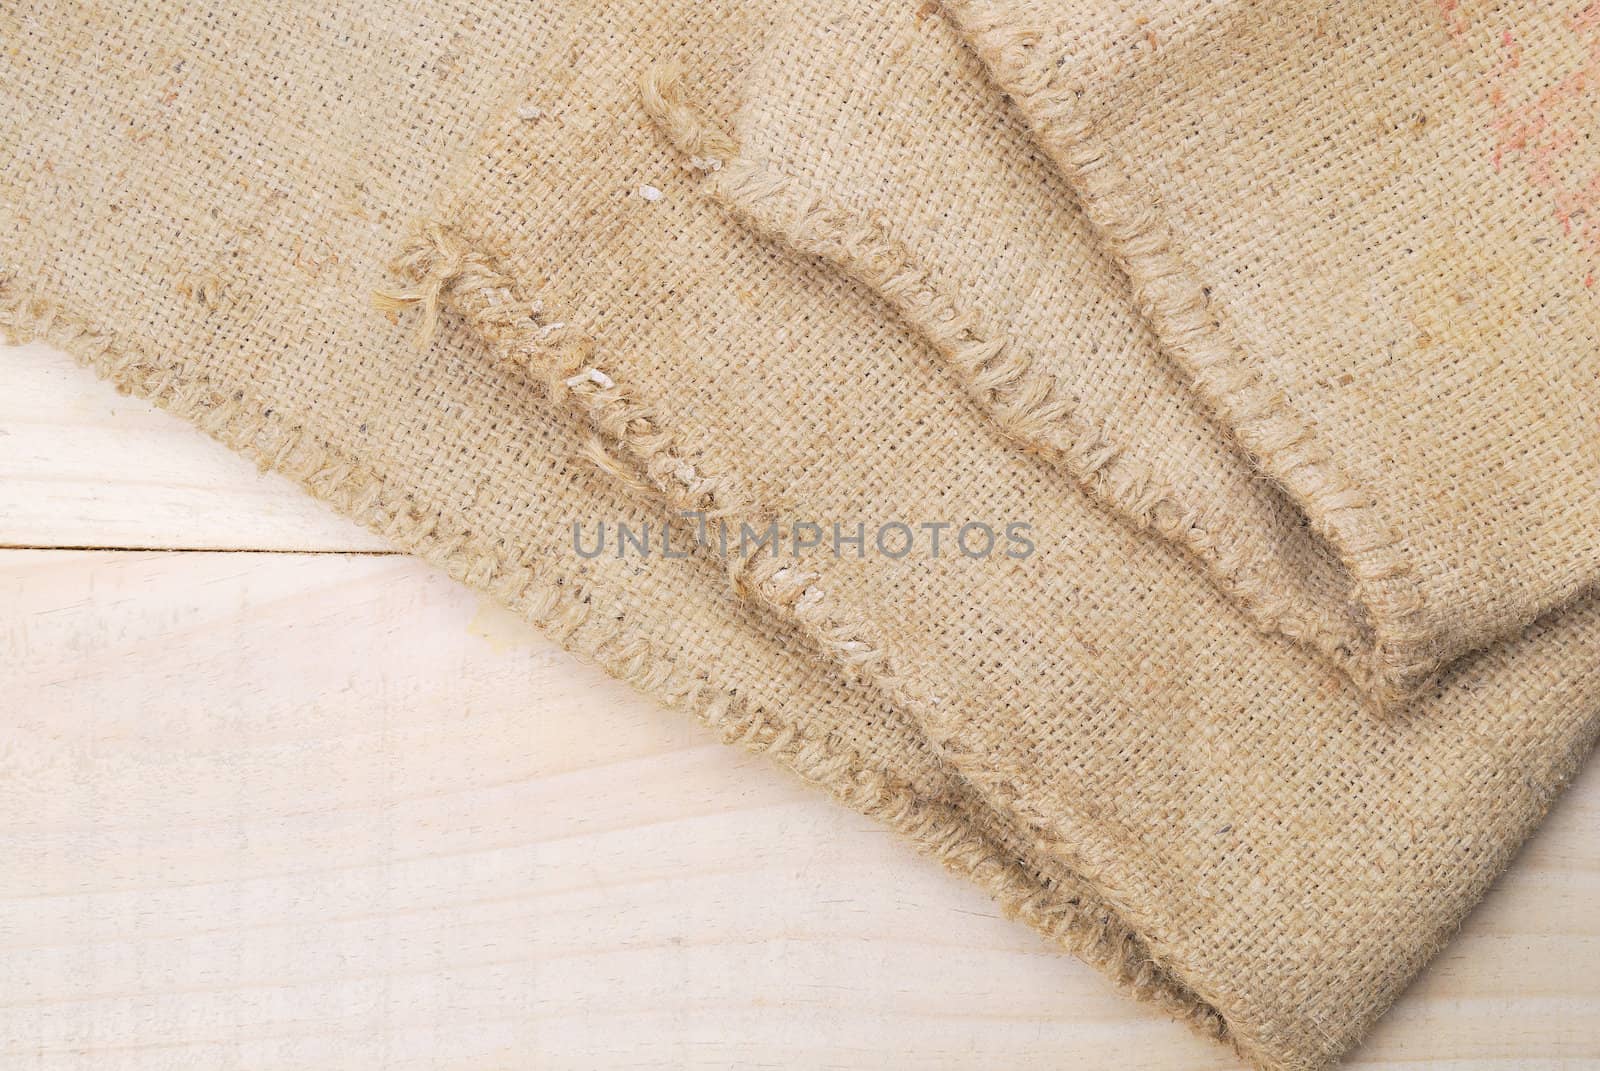 Gunny sack texture and wood plank table background by teen00000